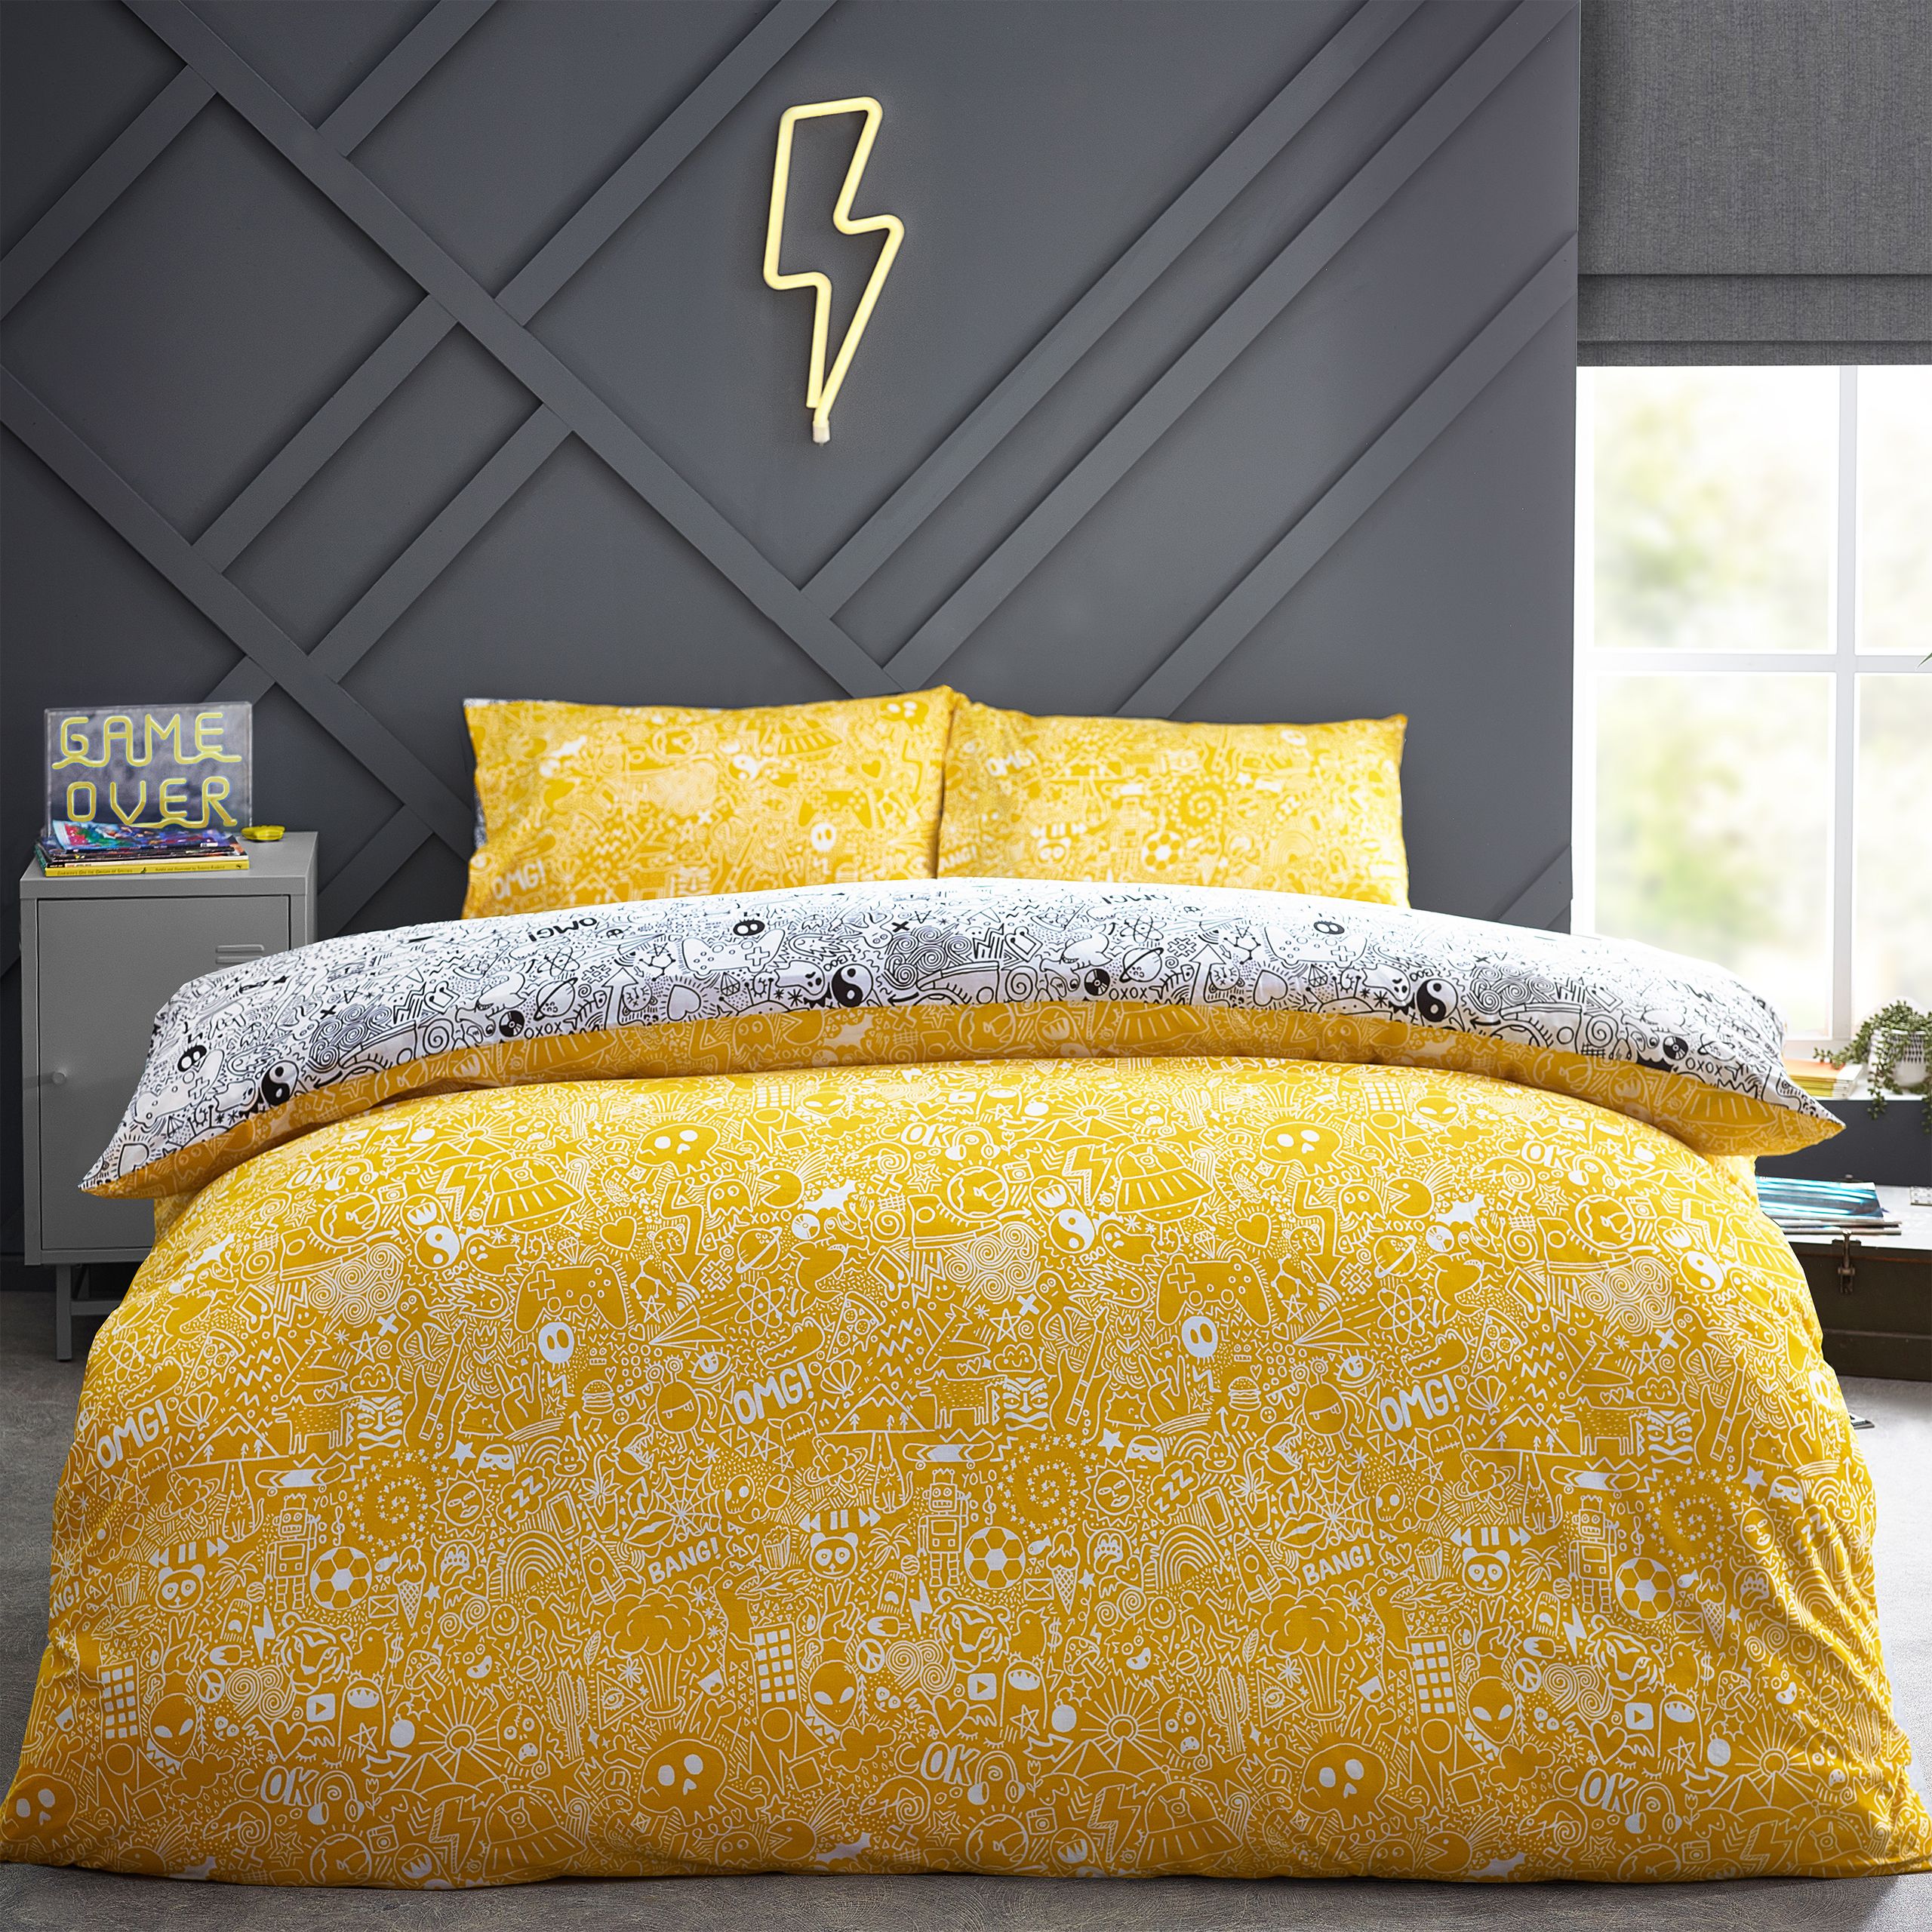 Express your creativity with this doodle duvet set. Featuring exciting notebook doodles of aliens, monsters, and spaceships. The excitement continues to the reverse a coordinating design on a yellow base so you can switch the look when you need to.